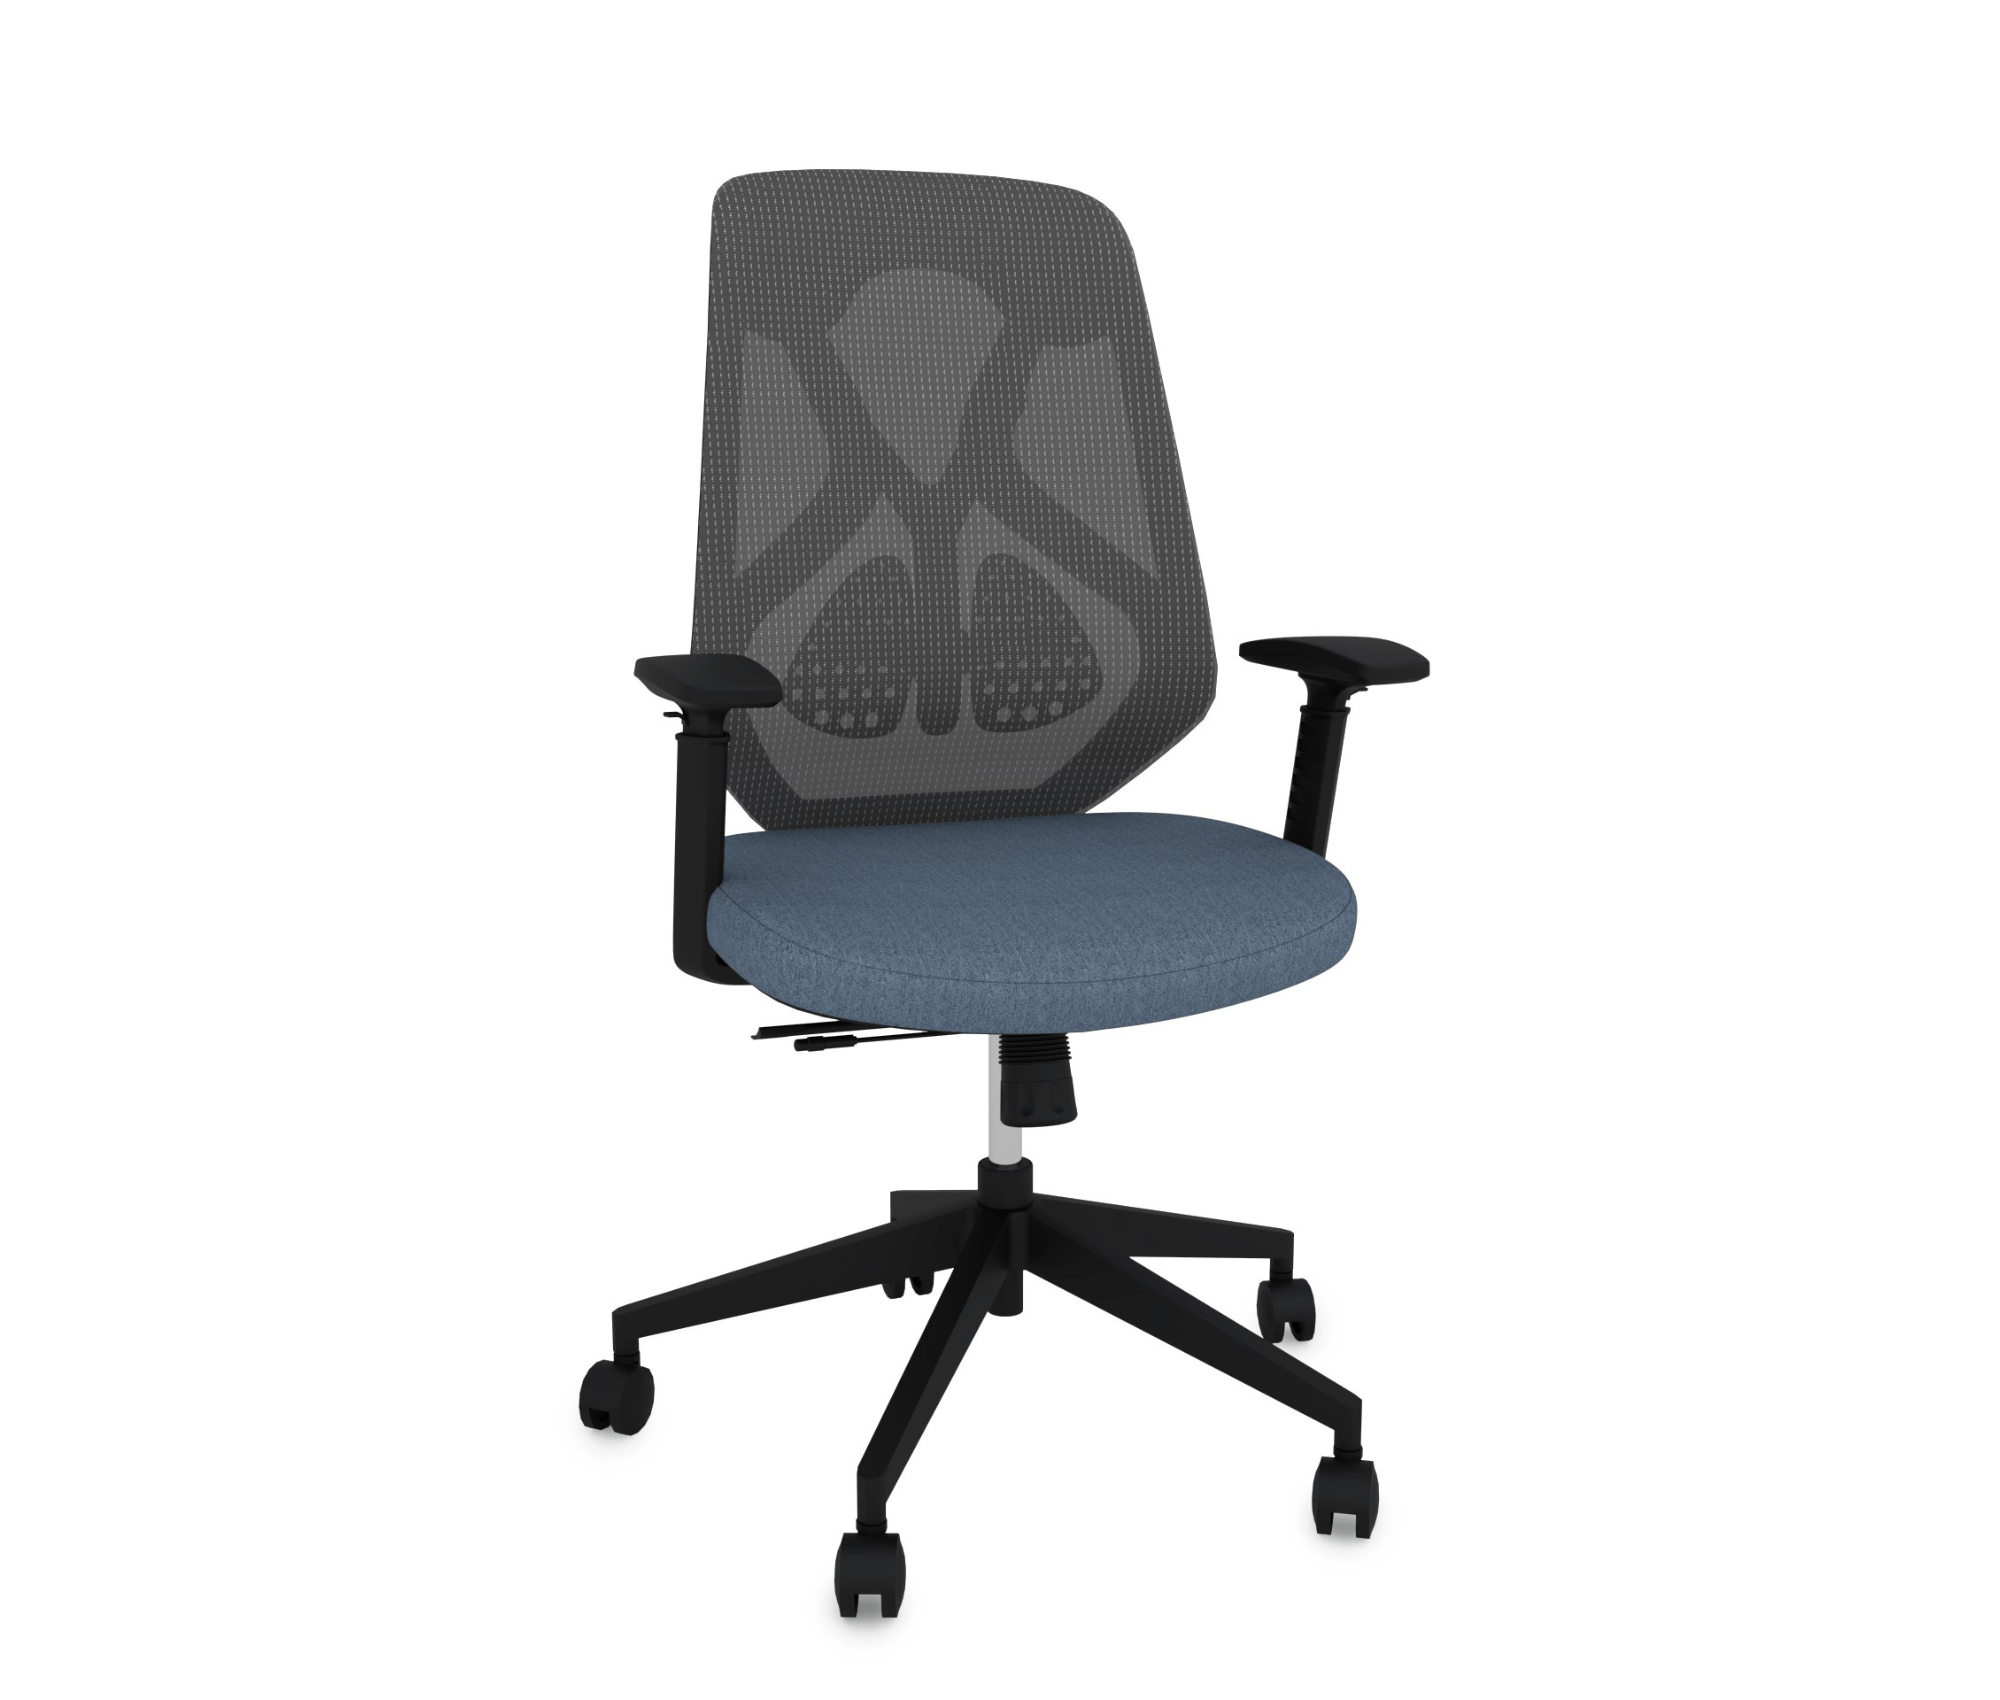 Ergonomic Chair | Office Chair with Adjustable Arms Porvata Office Chairs Blue